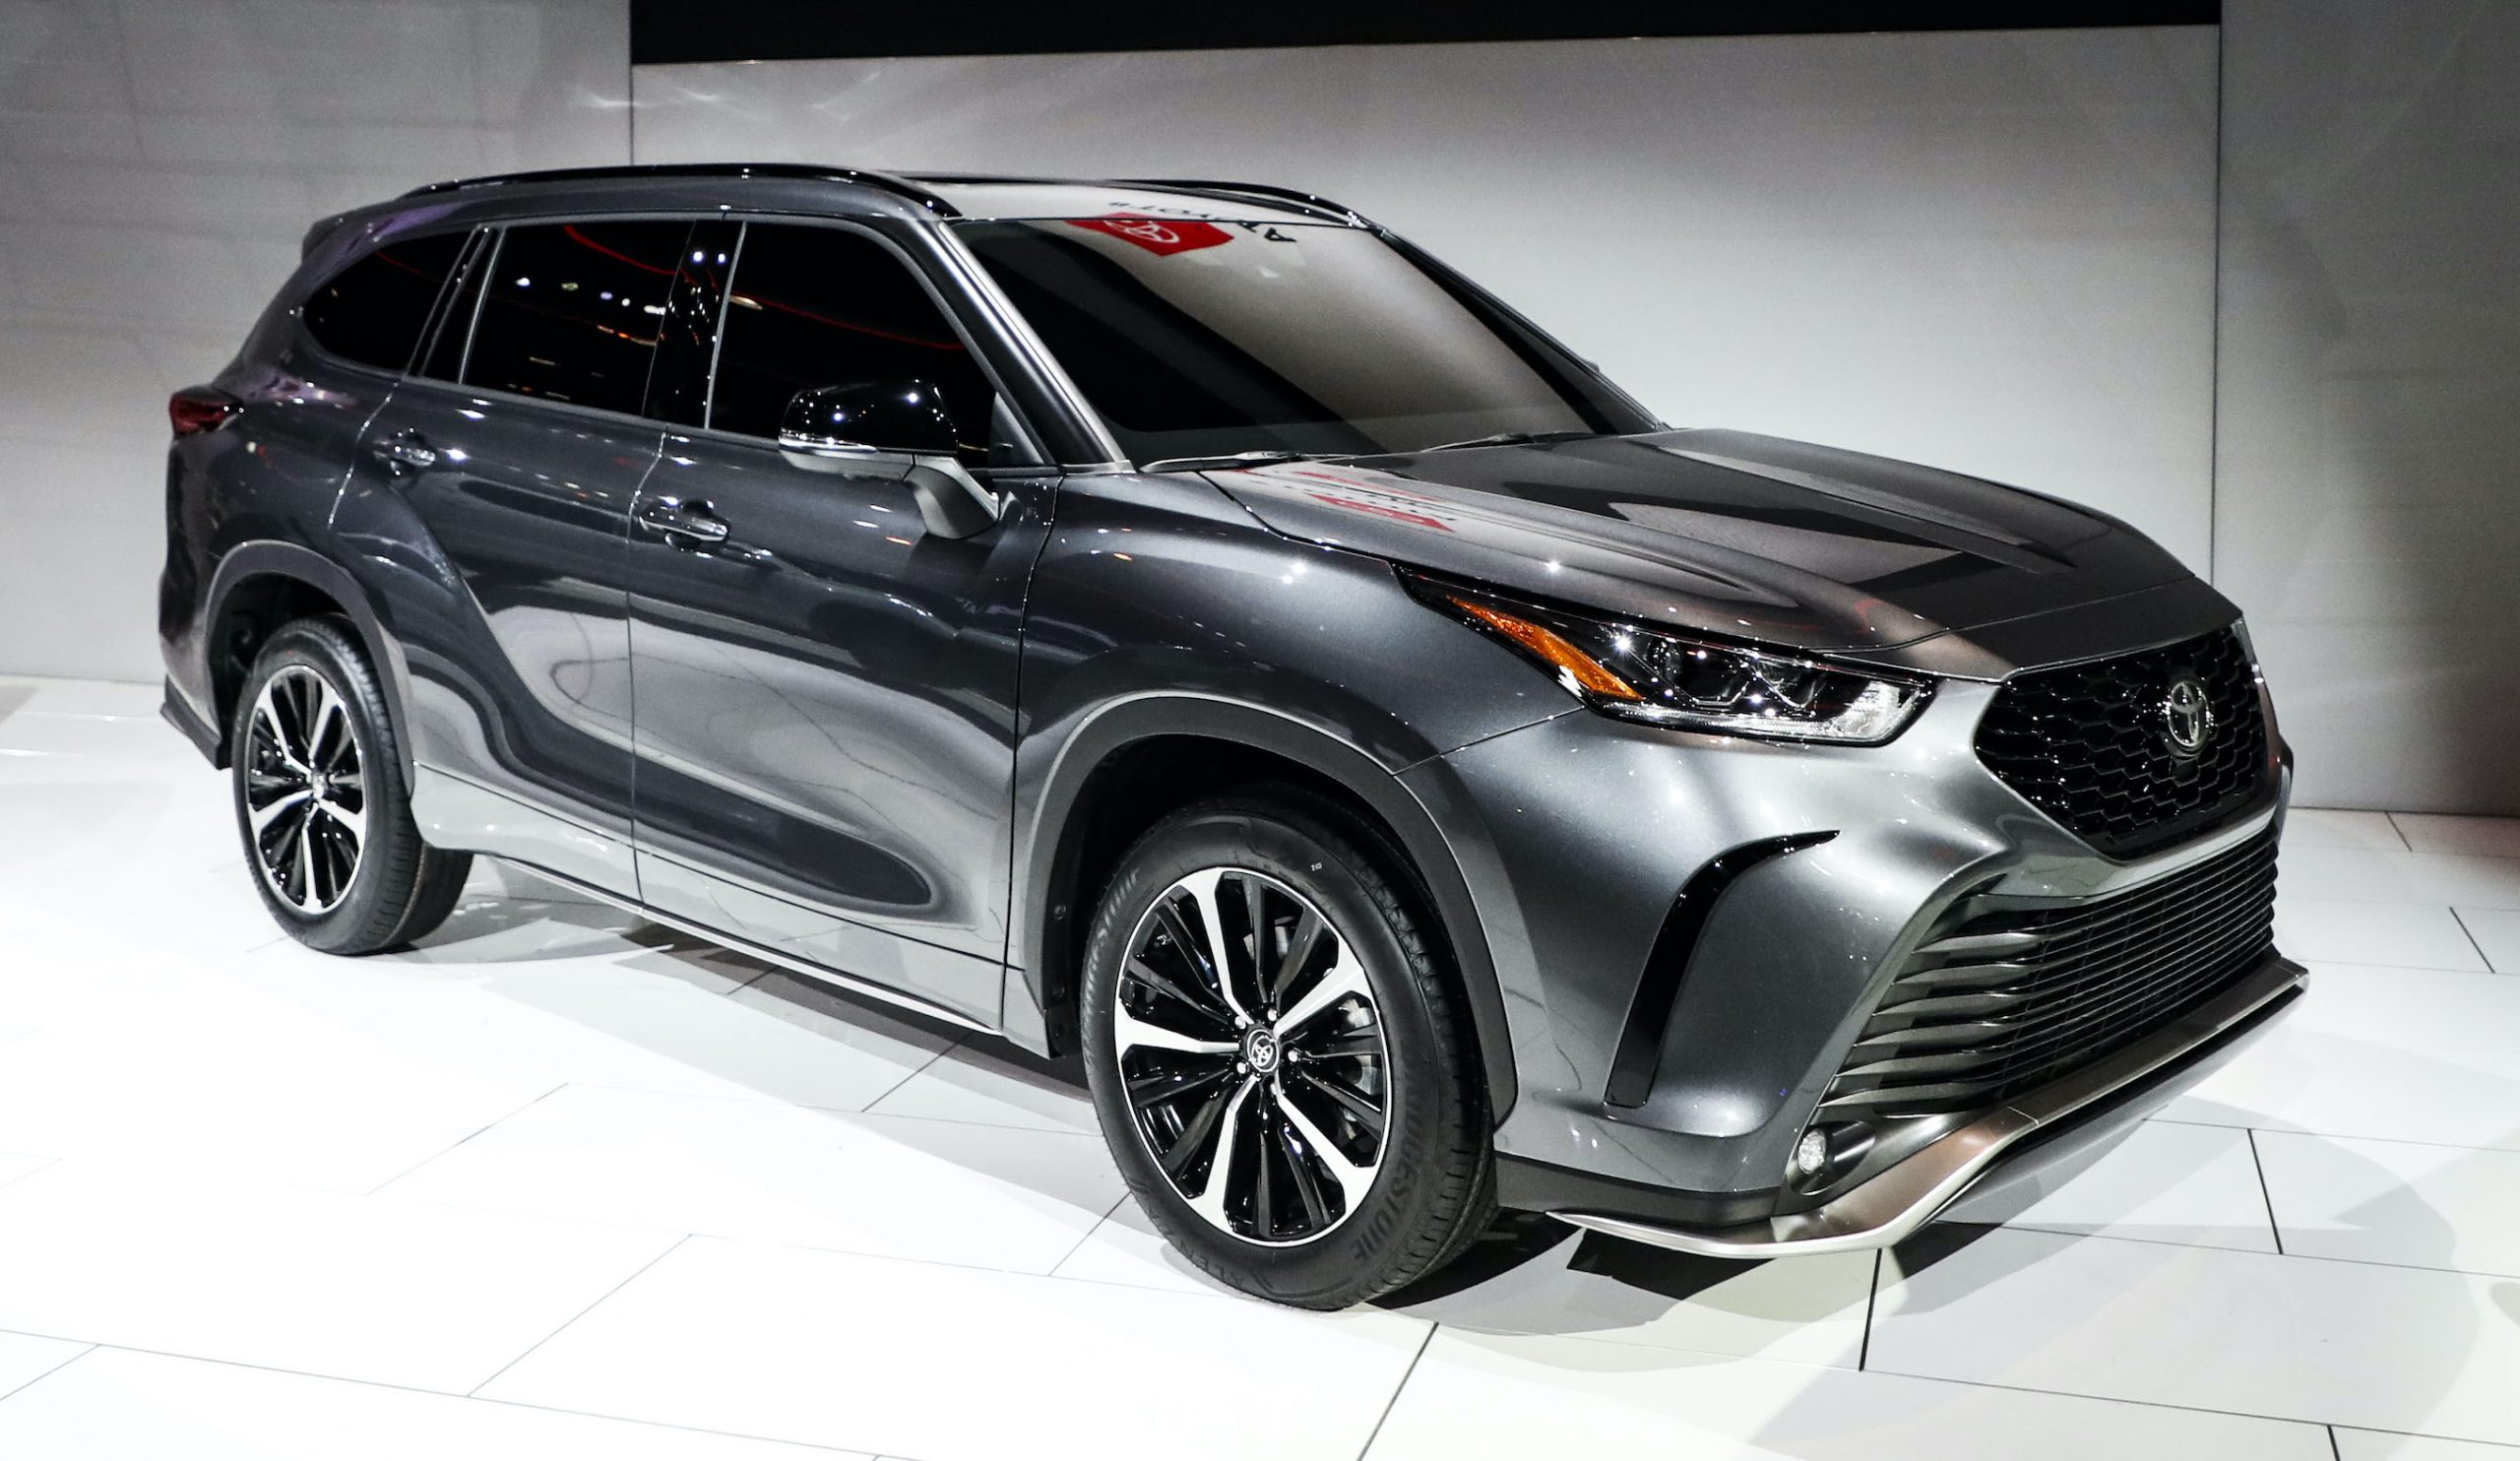 Toyota's 2021 Highlander XLE is displayed at the 2020 Chicago Auto Show Media Preview